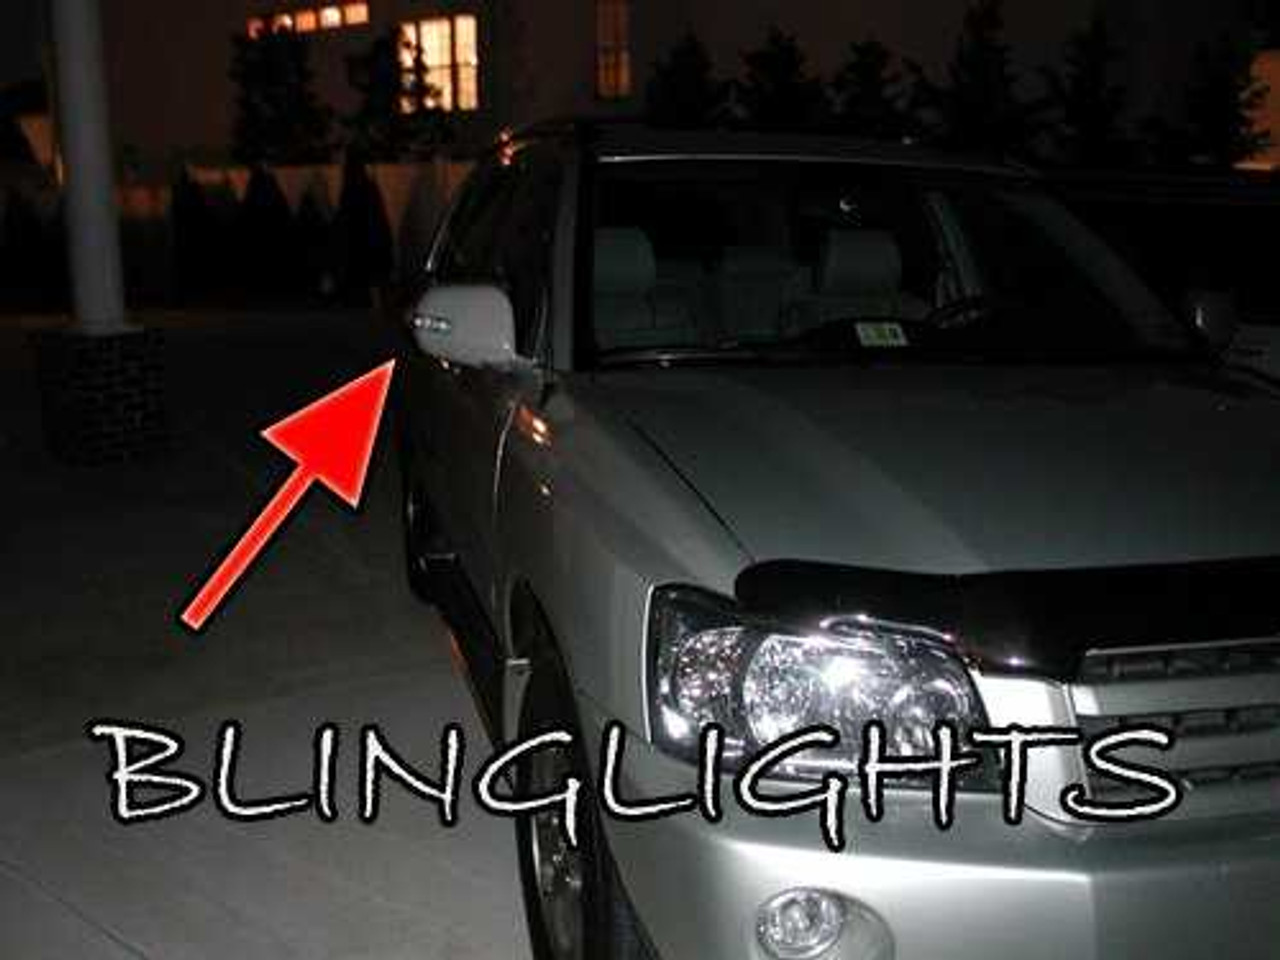 2000 2001 2002 2003 2004 2005 2006 2007 Toyota Kluger LEDs Mirrors Turnsignals Turn Signals Lights